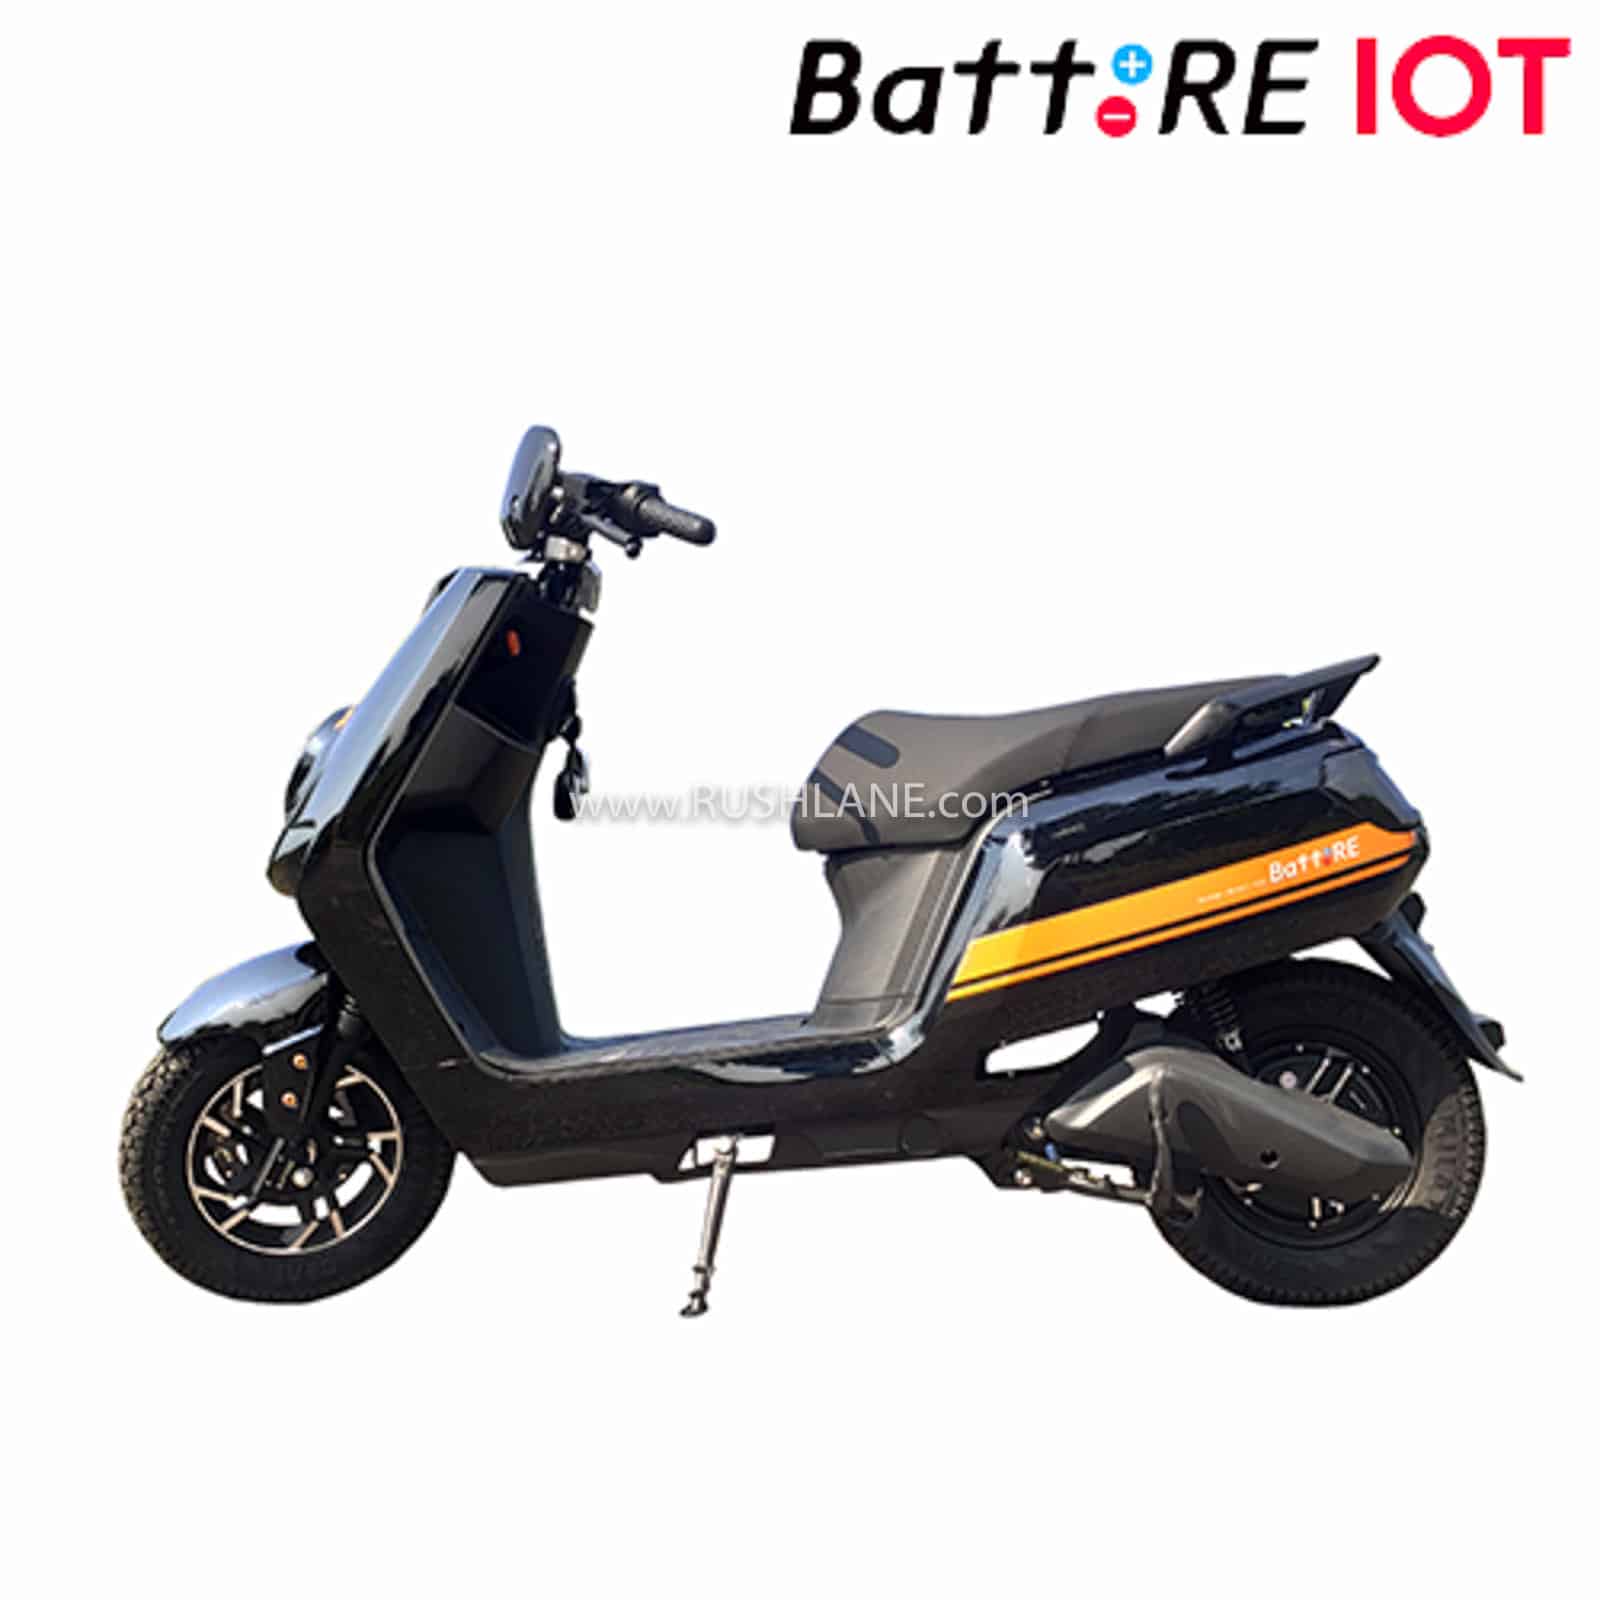 BattRE electric scooter internet